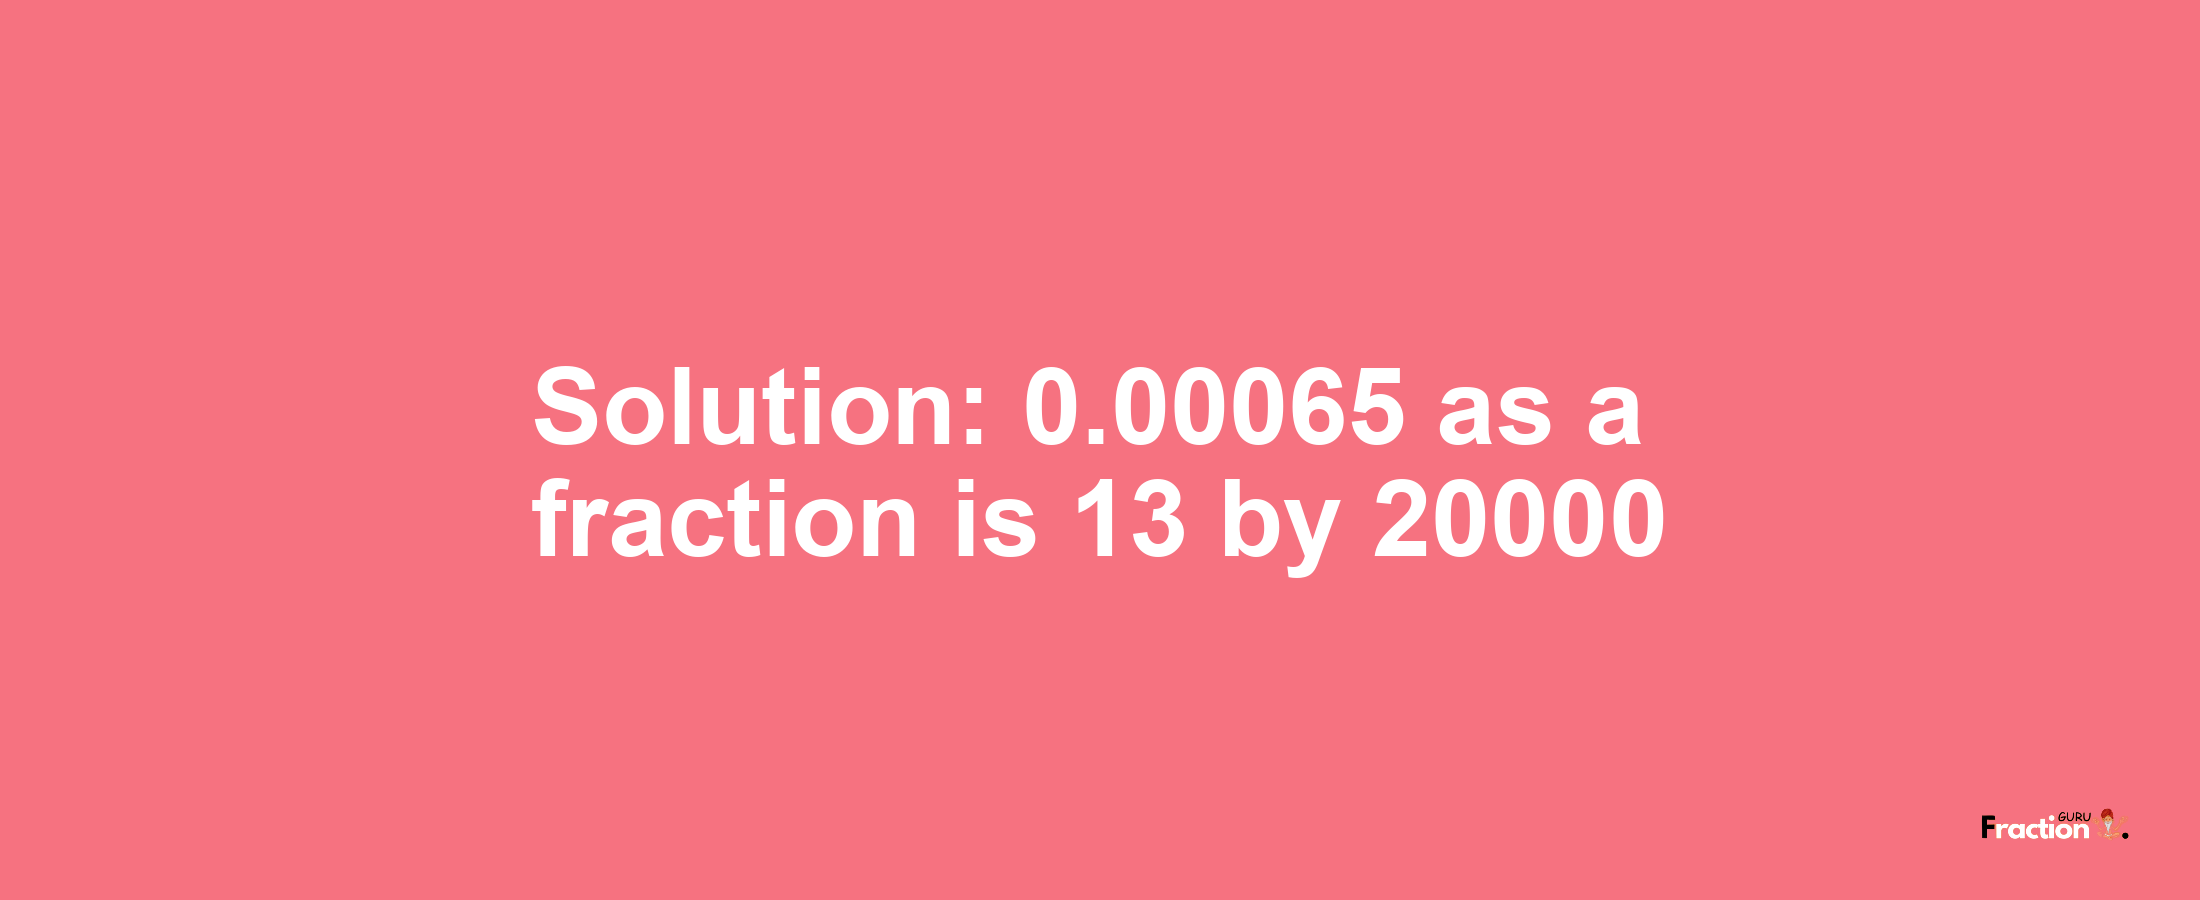 Solution:0.00065 as a fraction is 13/20000